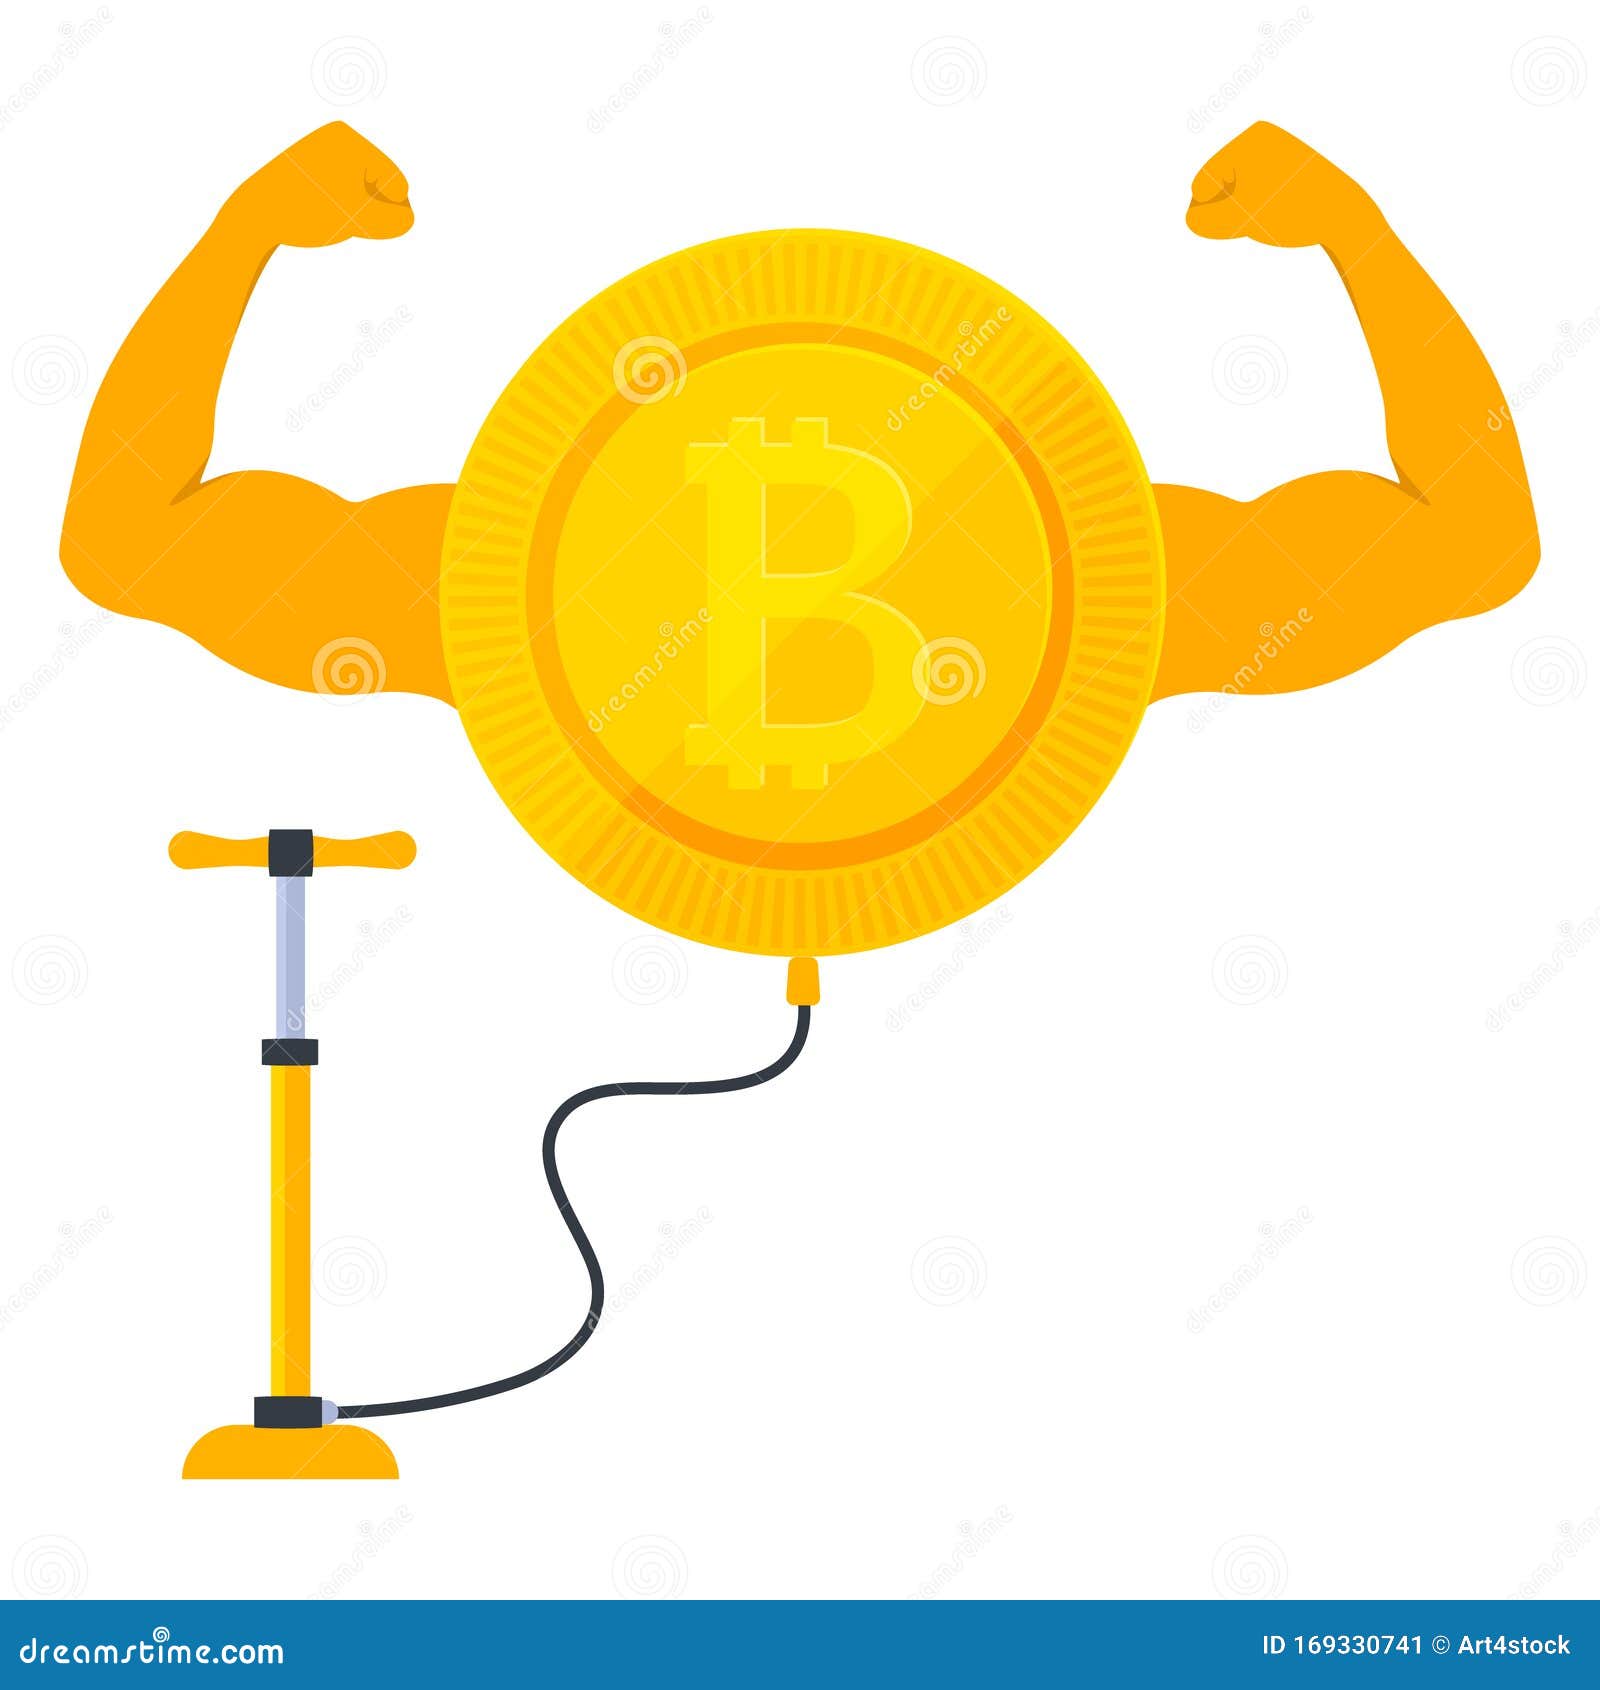 pump cryptocurrency